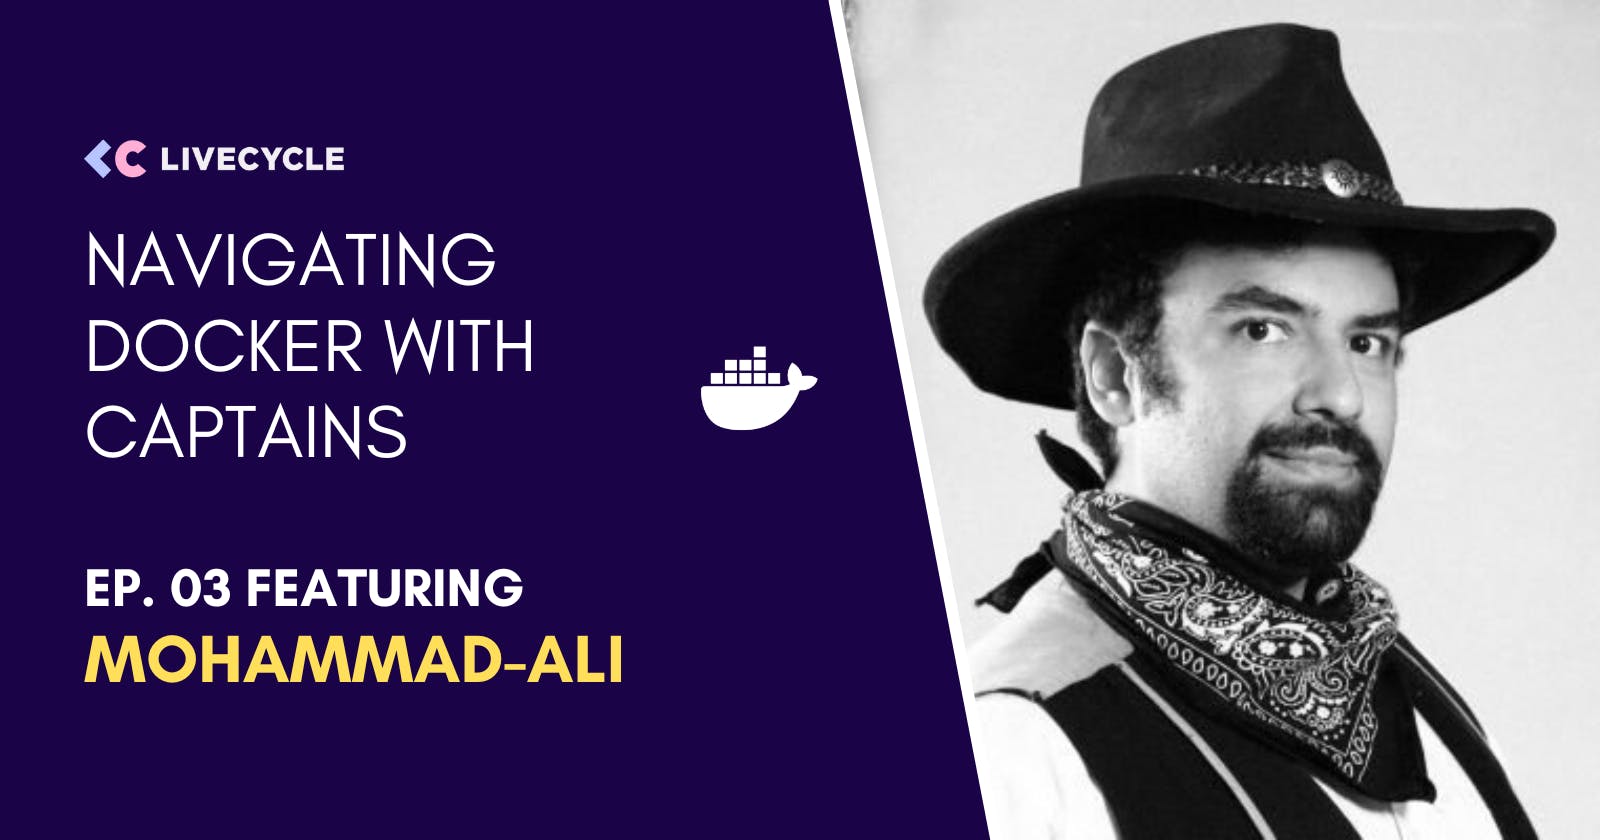 Navigating Docker With Captains Ep. 03 with Mohammad-Ali